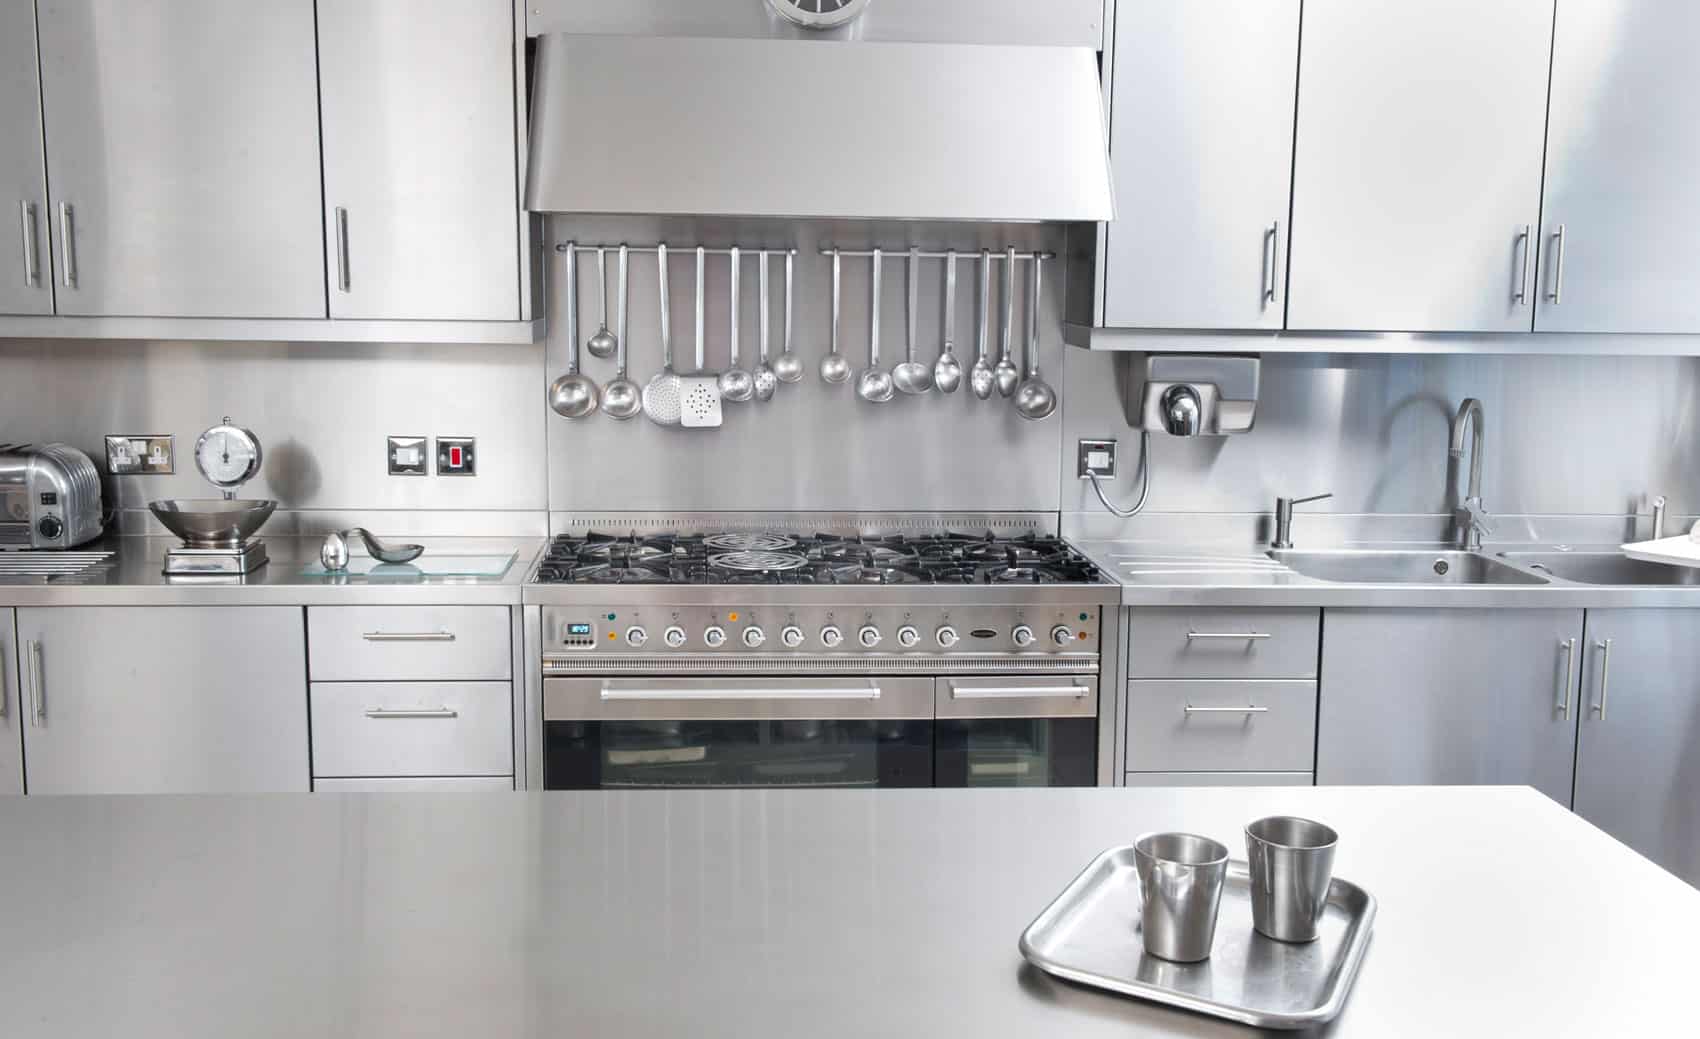 Wooden Kitchens Vs Stainless Steel, Steel Kitchen Cabinets Vs Wood